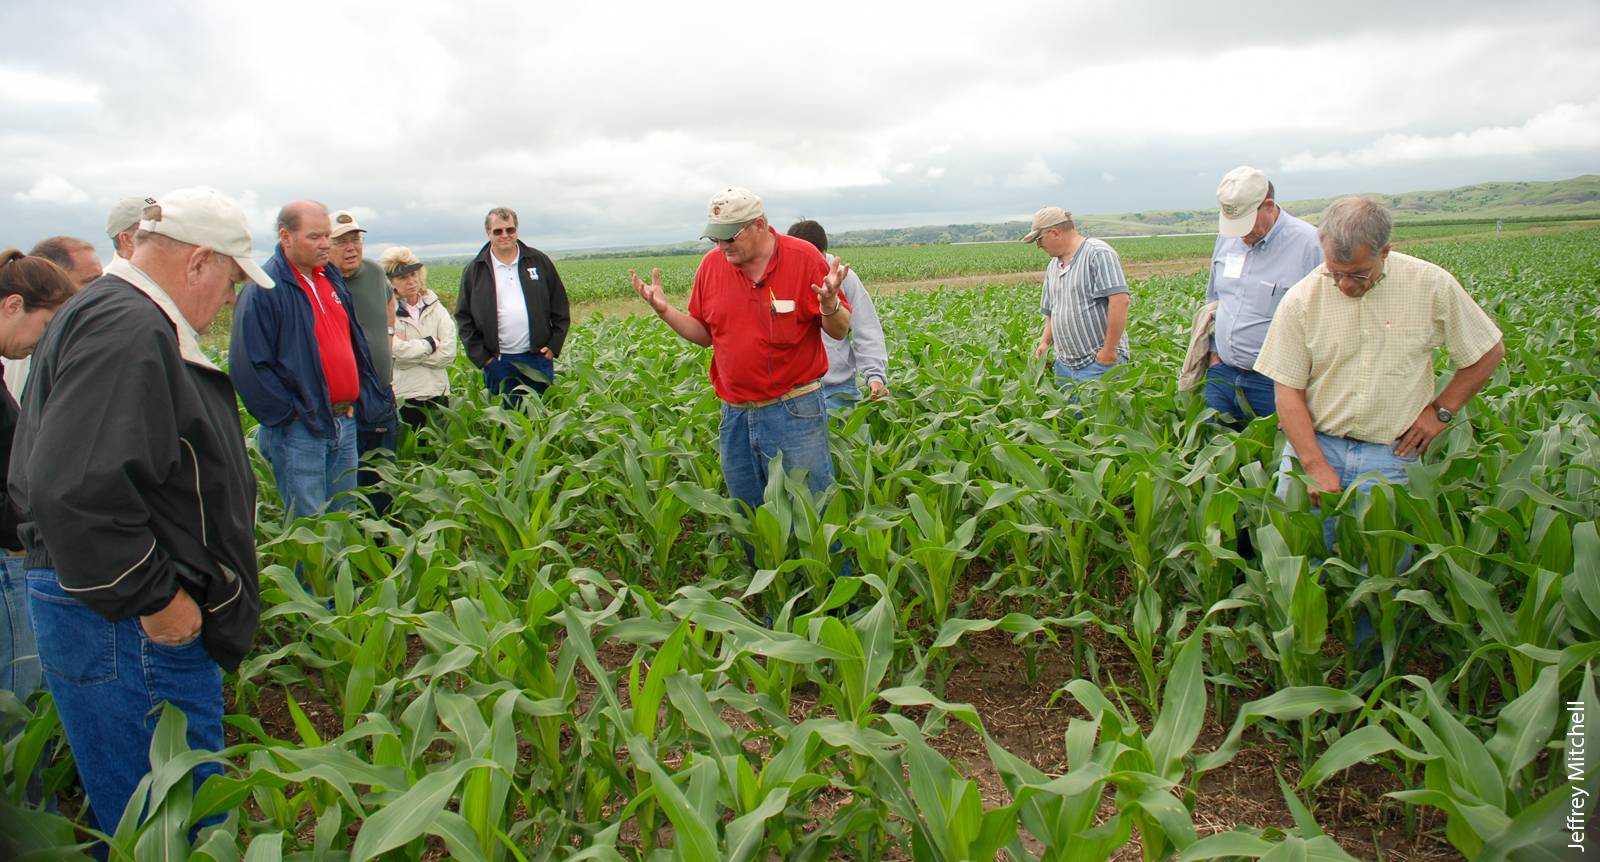 CASI farmers and members visited South Dakota, Nebraska and Colorado in 2006 to learn about conservation agriculture systems. Here, participants tour the Dakota Lakes Research Farm, a research and extension center of South Dakota State University, in Pierre.